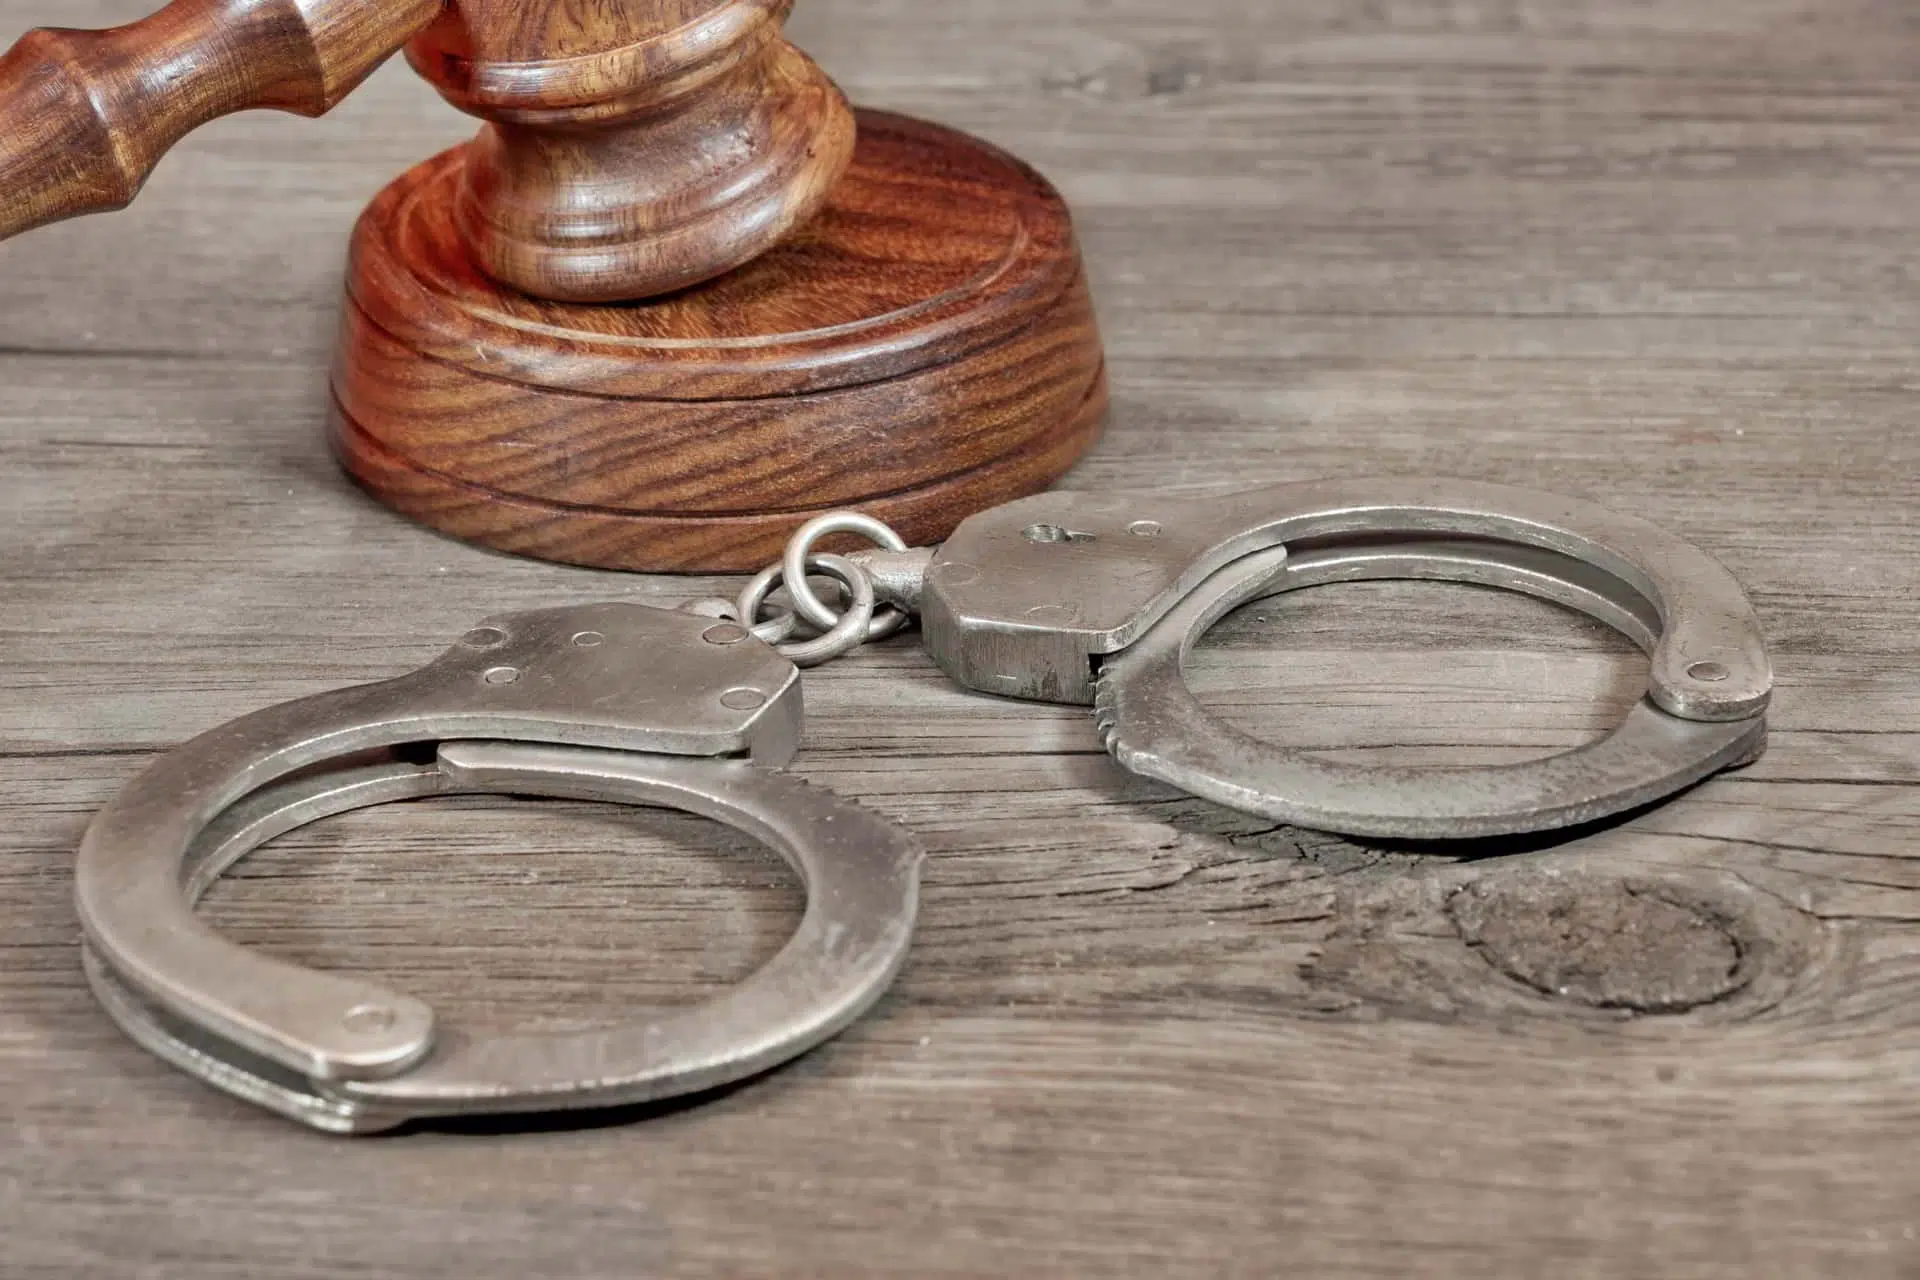 Pair of handcuffs on a desk next to a gavel